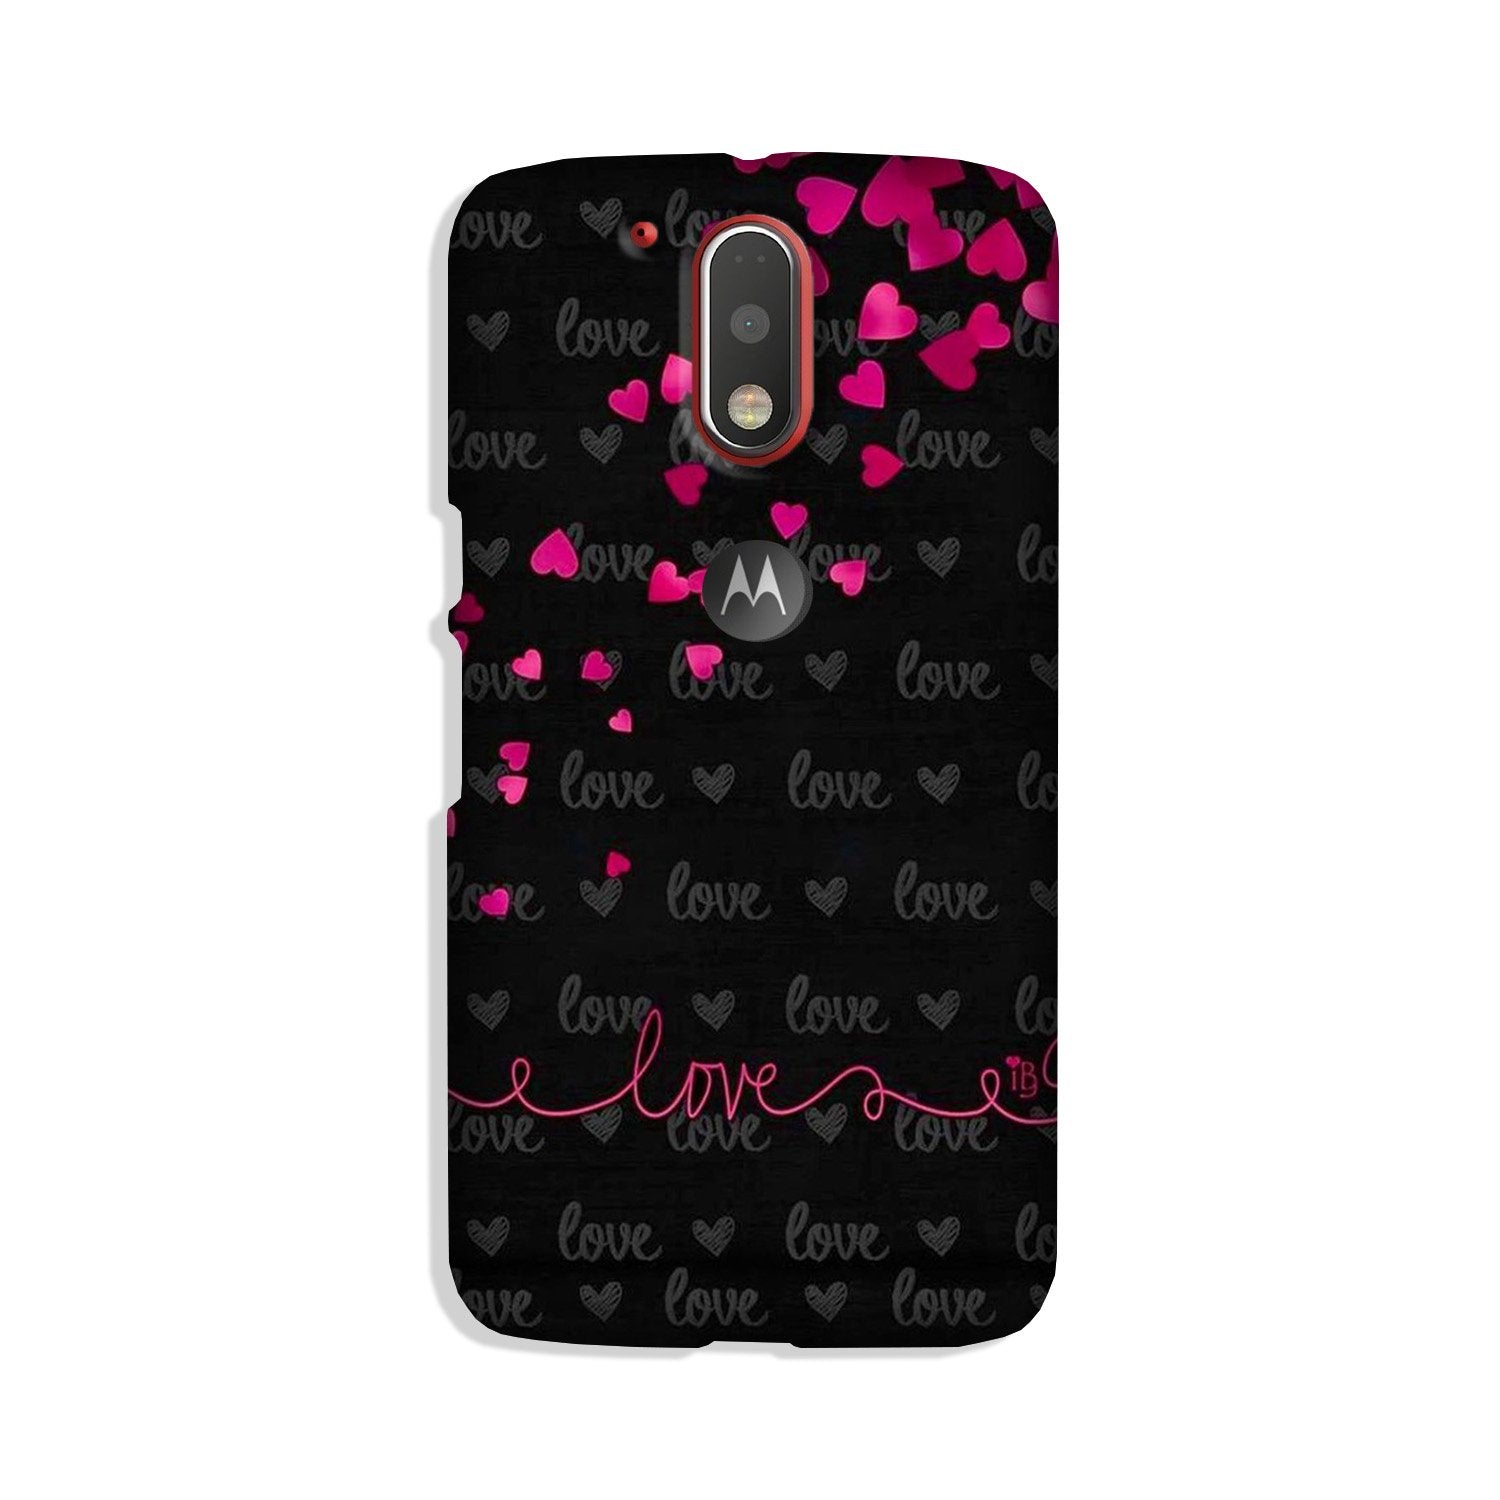 Love in Air Case for Moto G4 Plus